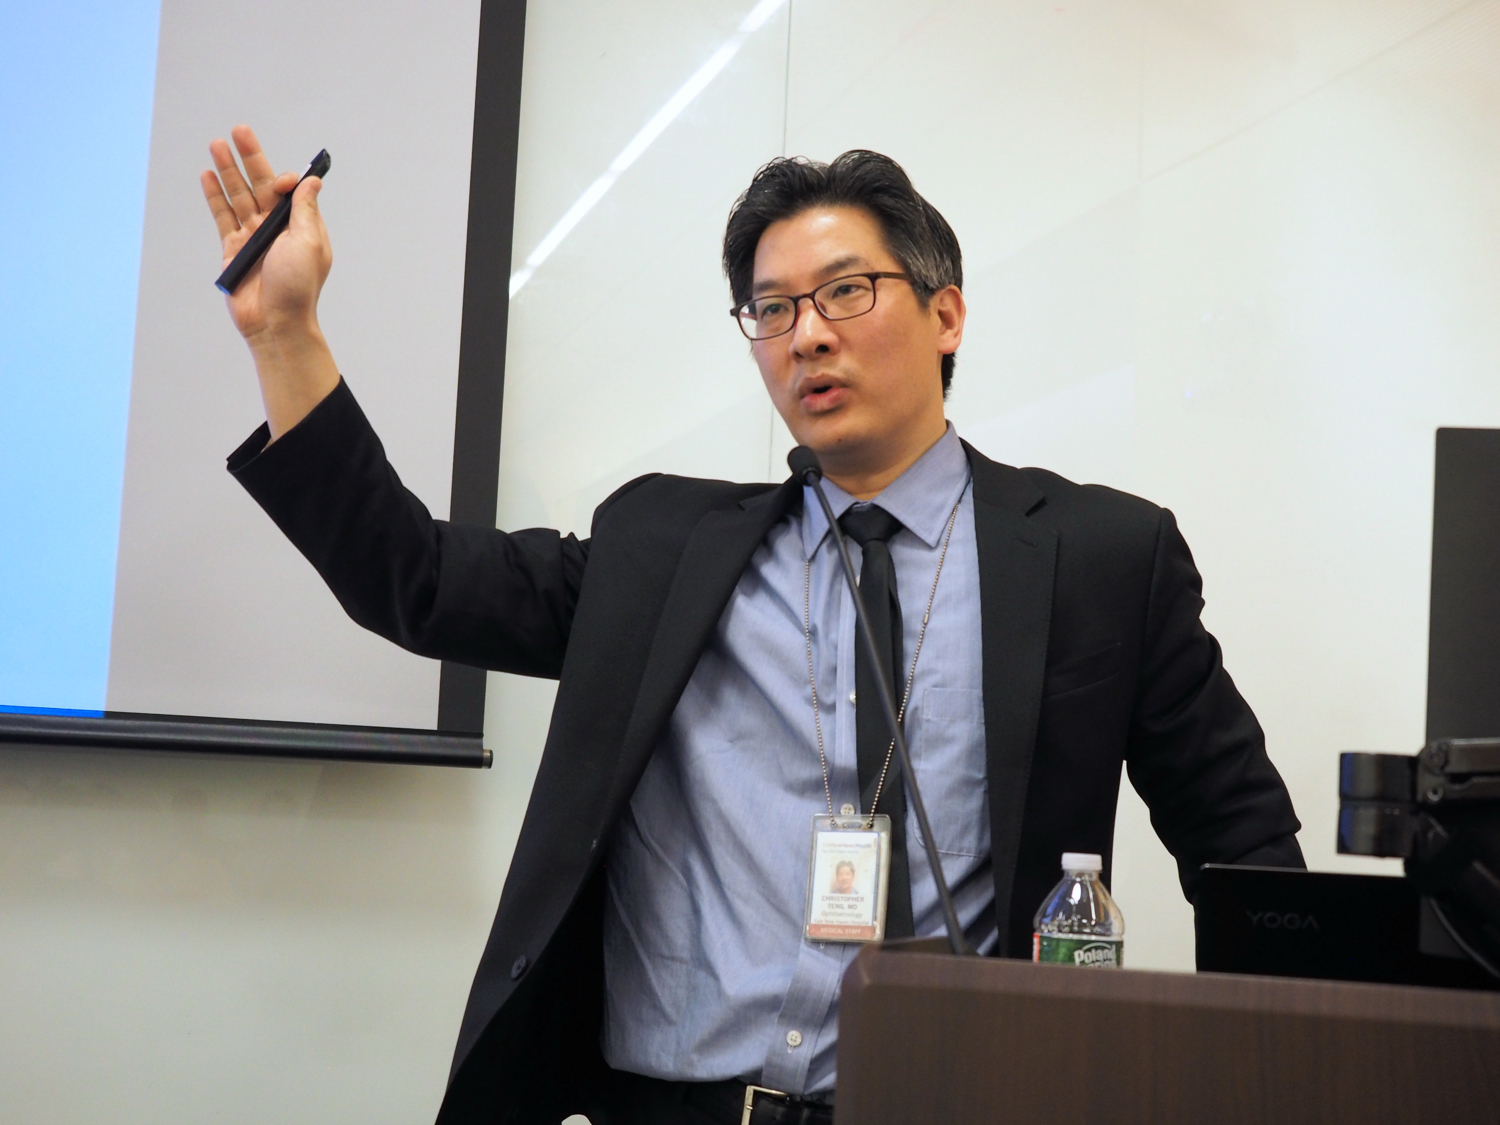 Dr. Christopher Teng’s lecture 